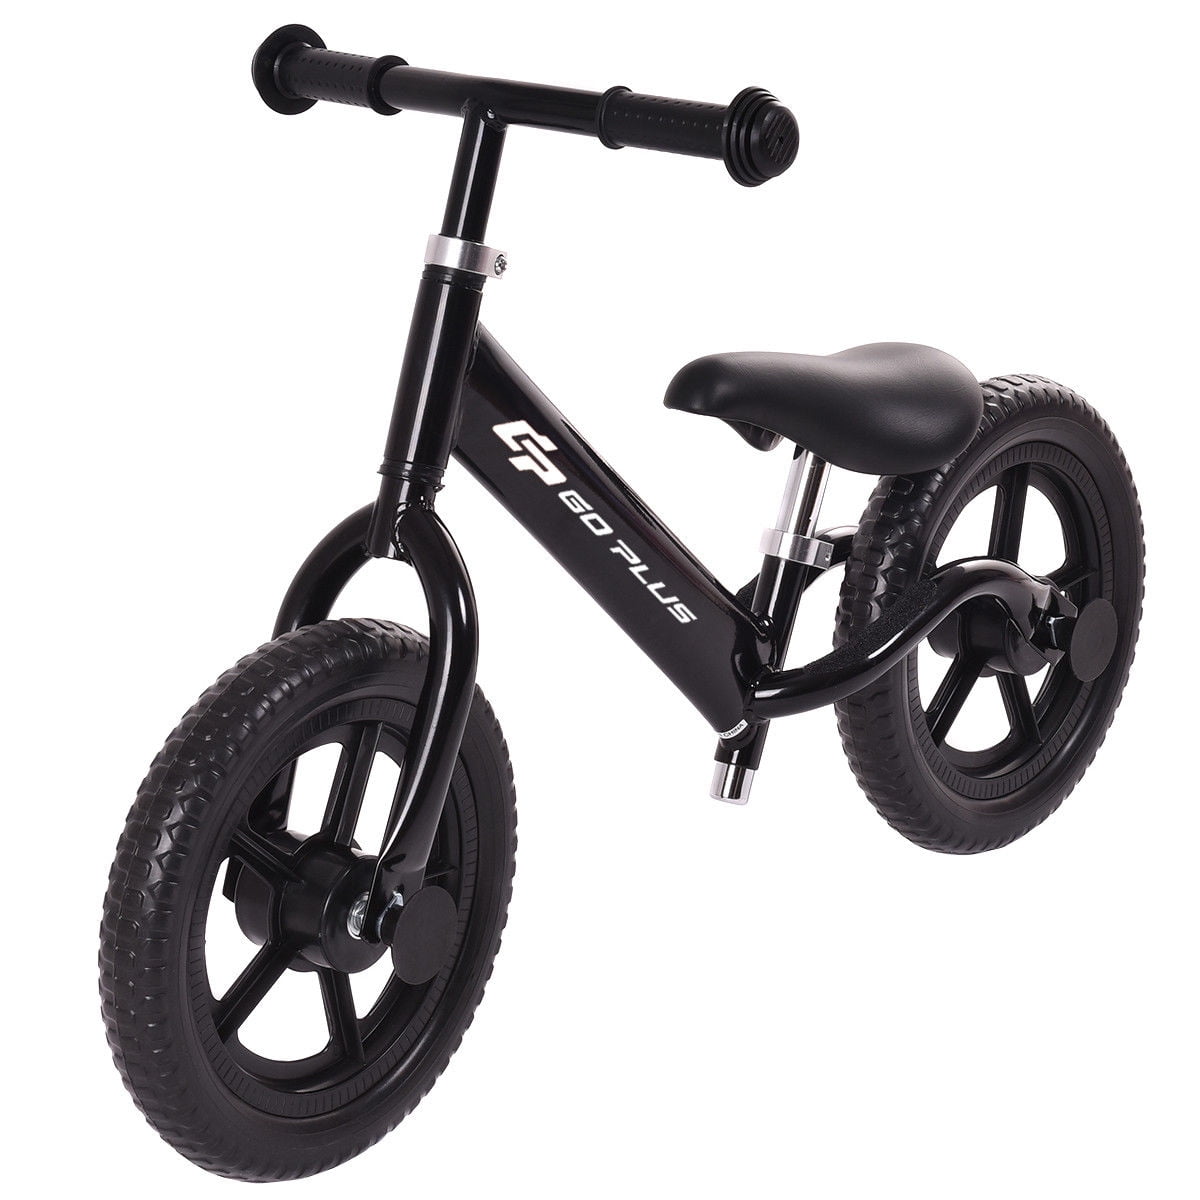 Kid Balance Training 12" Bike No-Pedal Learn To Ride Pre Push Bicycle Children